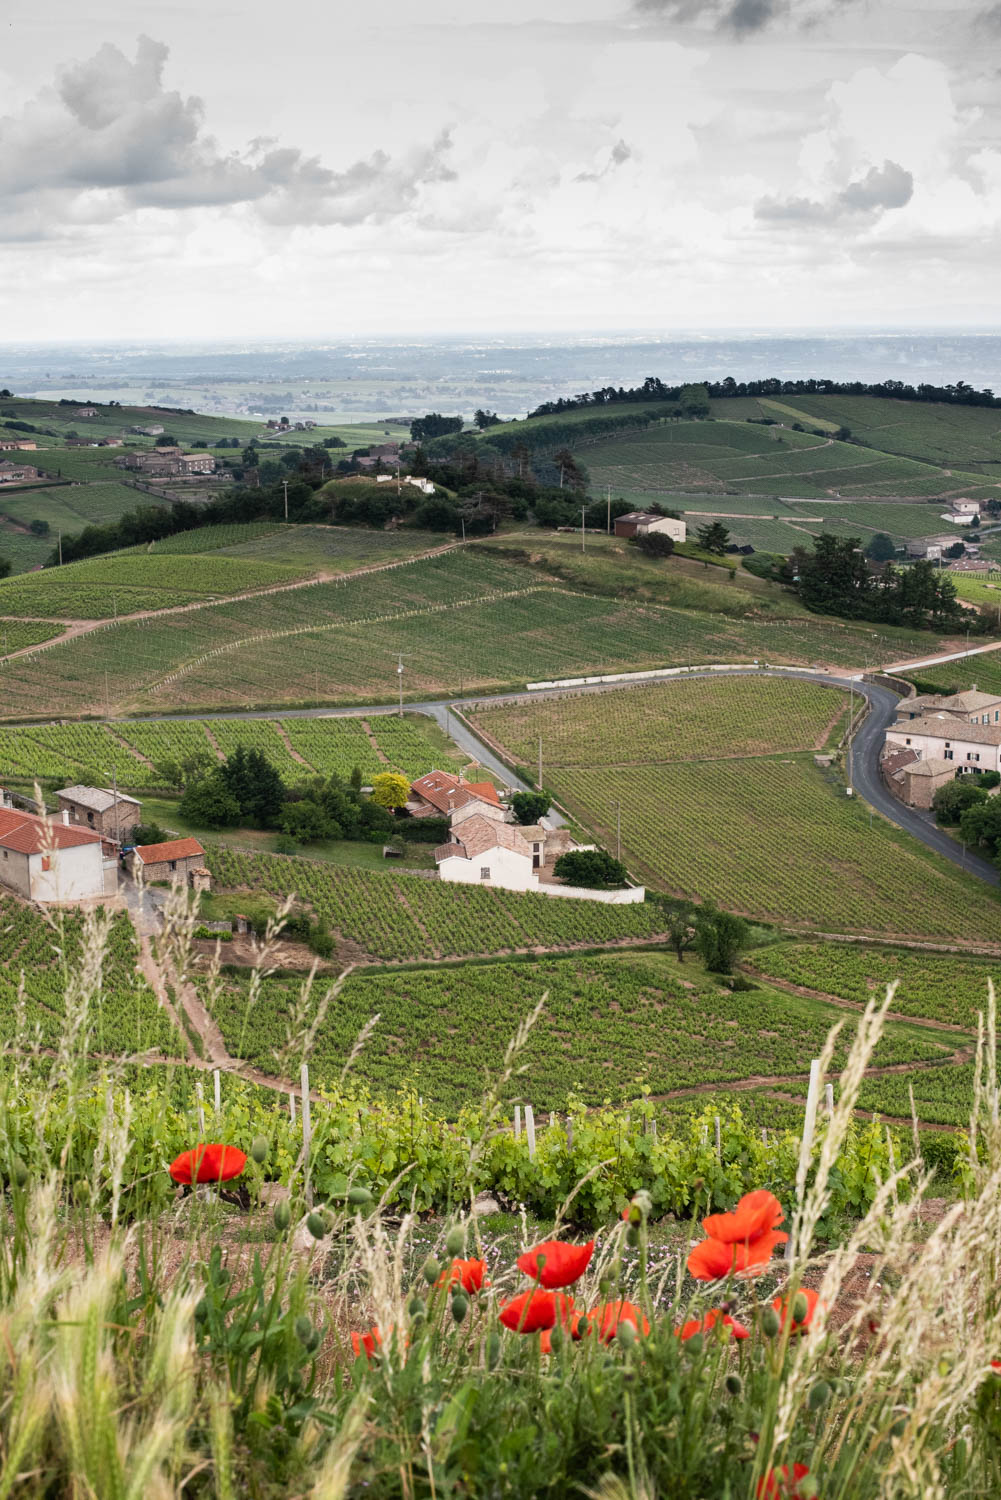 Image from the top of a hill with poppies in foreground and vineyards of Beaujolais in background